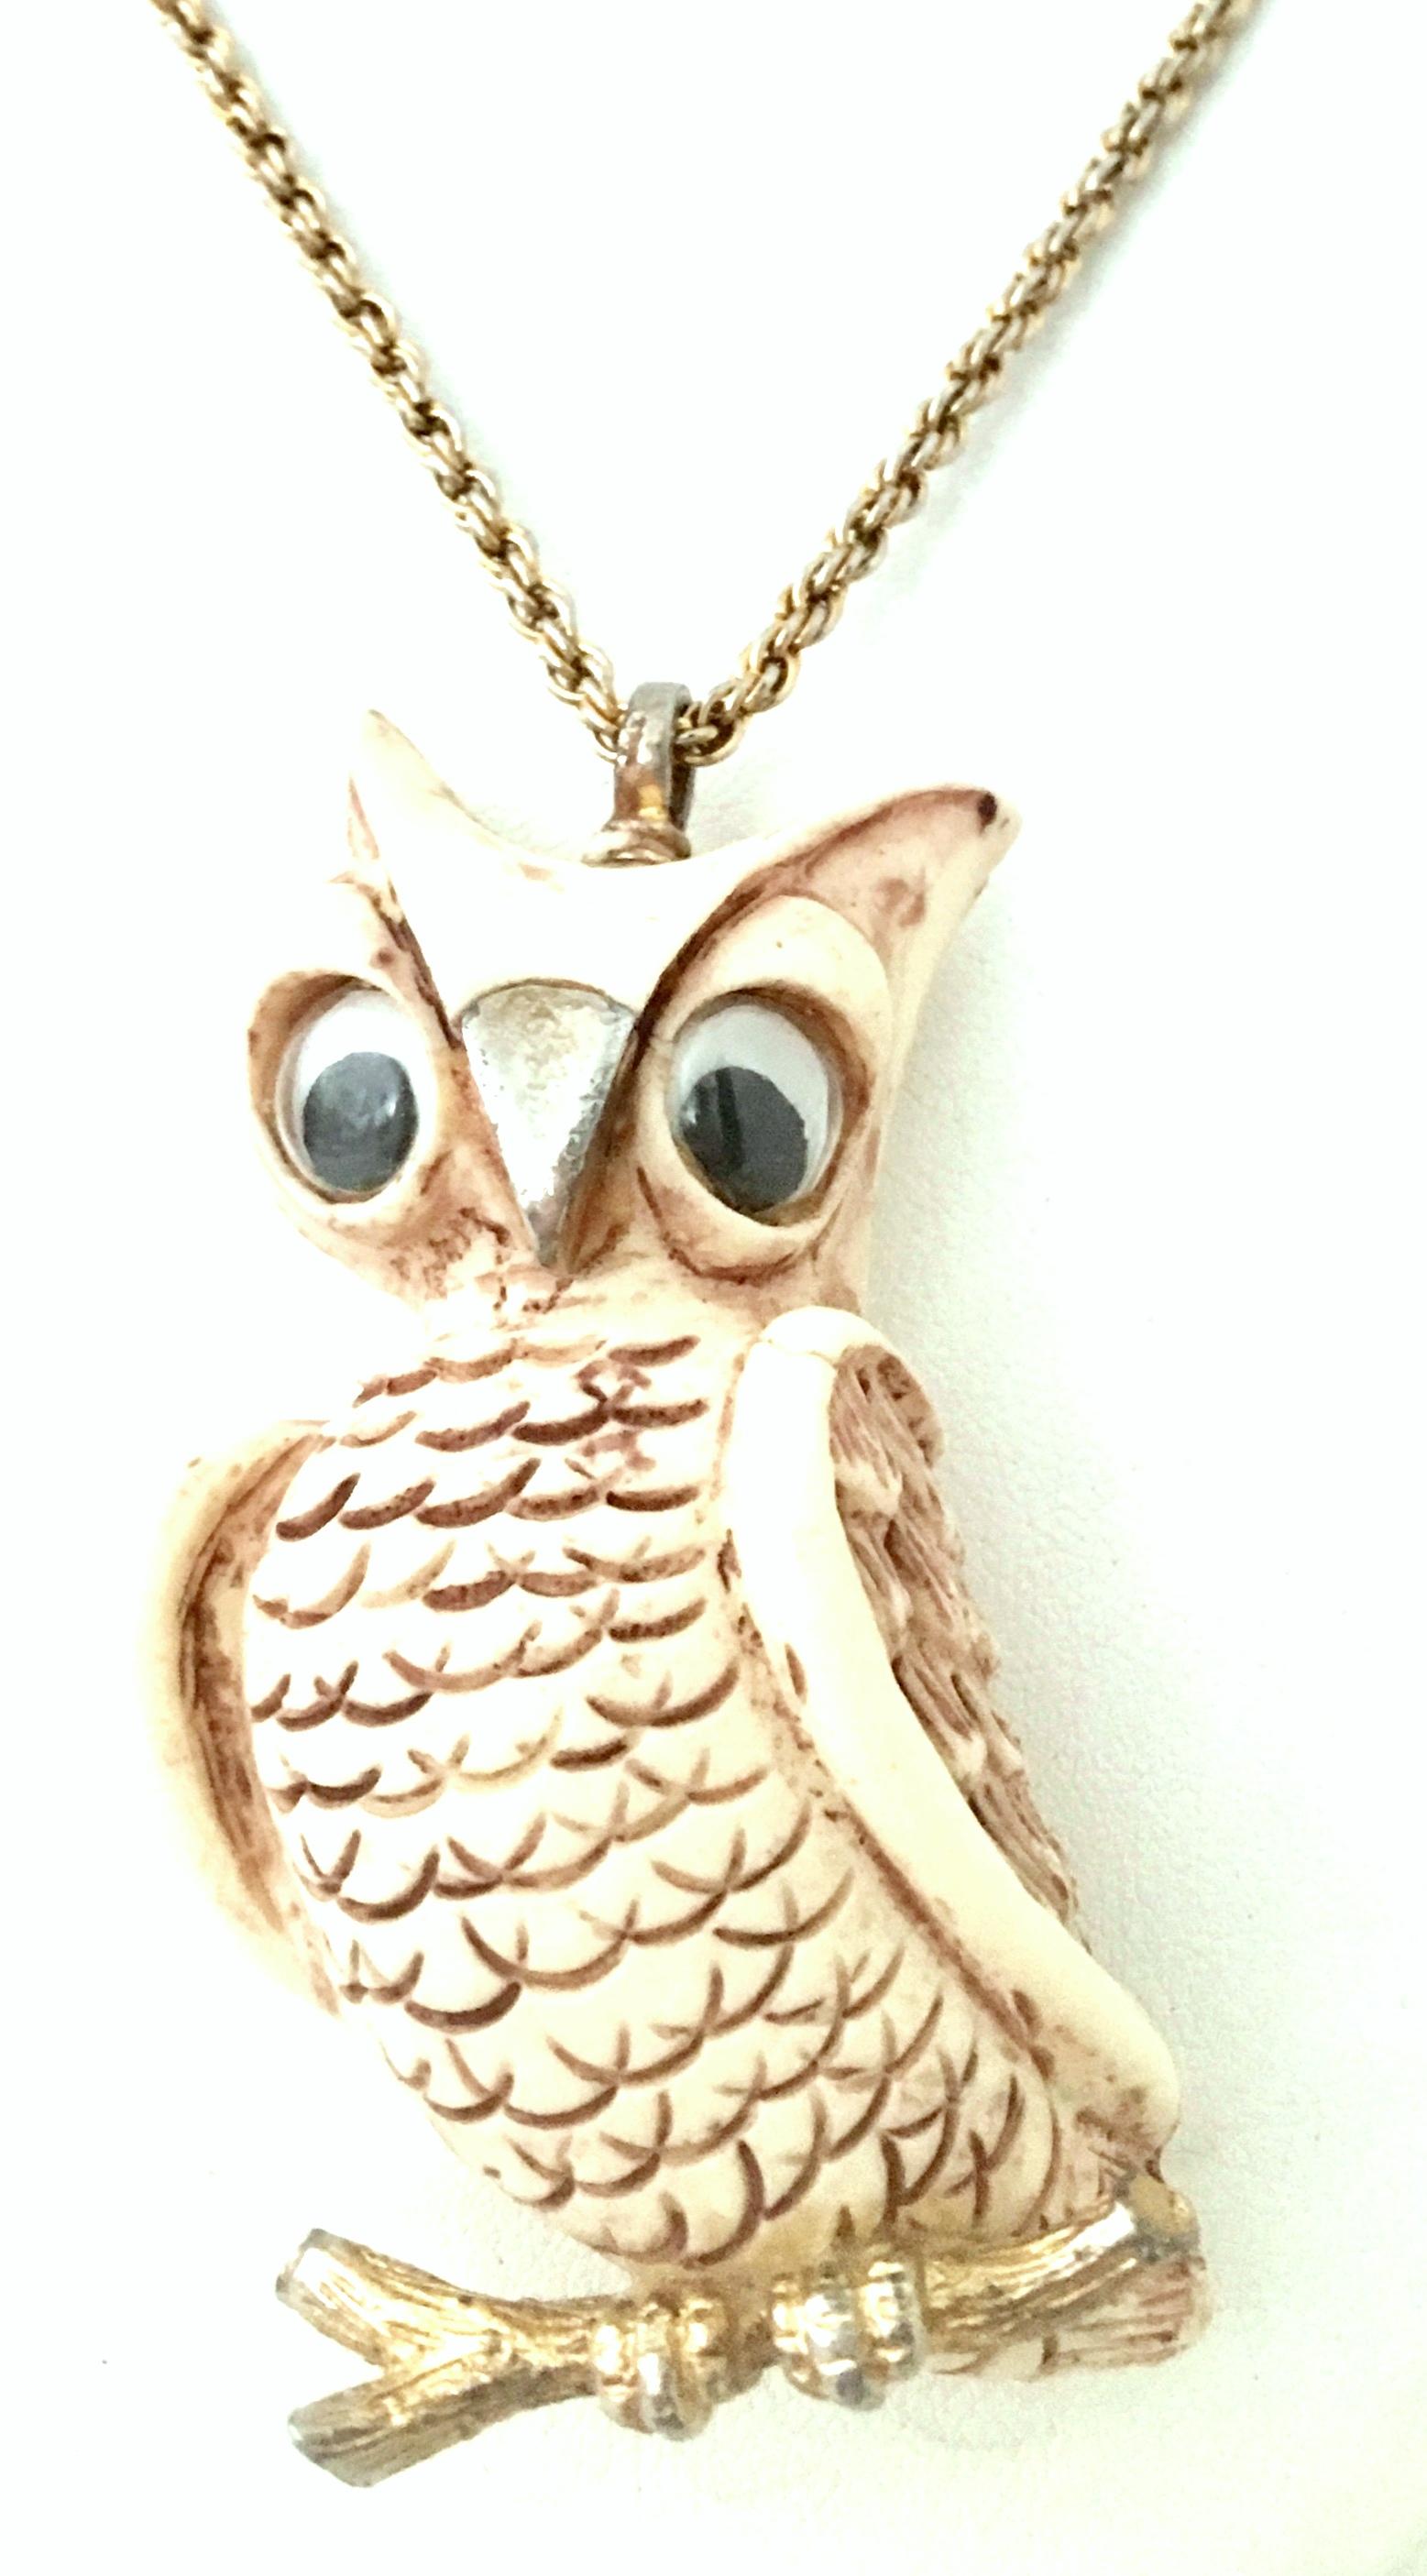 Women's or Men's 70'S Gold & Resin Carved Owl Pendant Necklace By Luca Razza